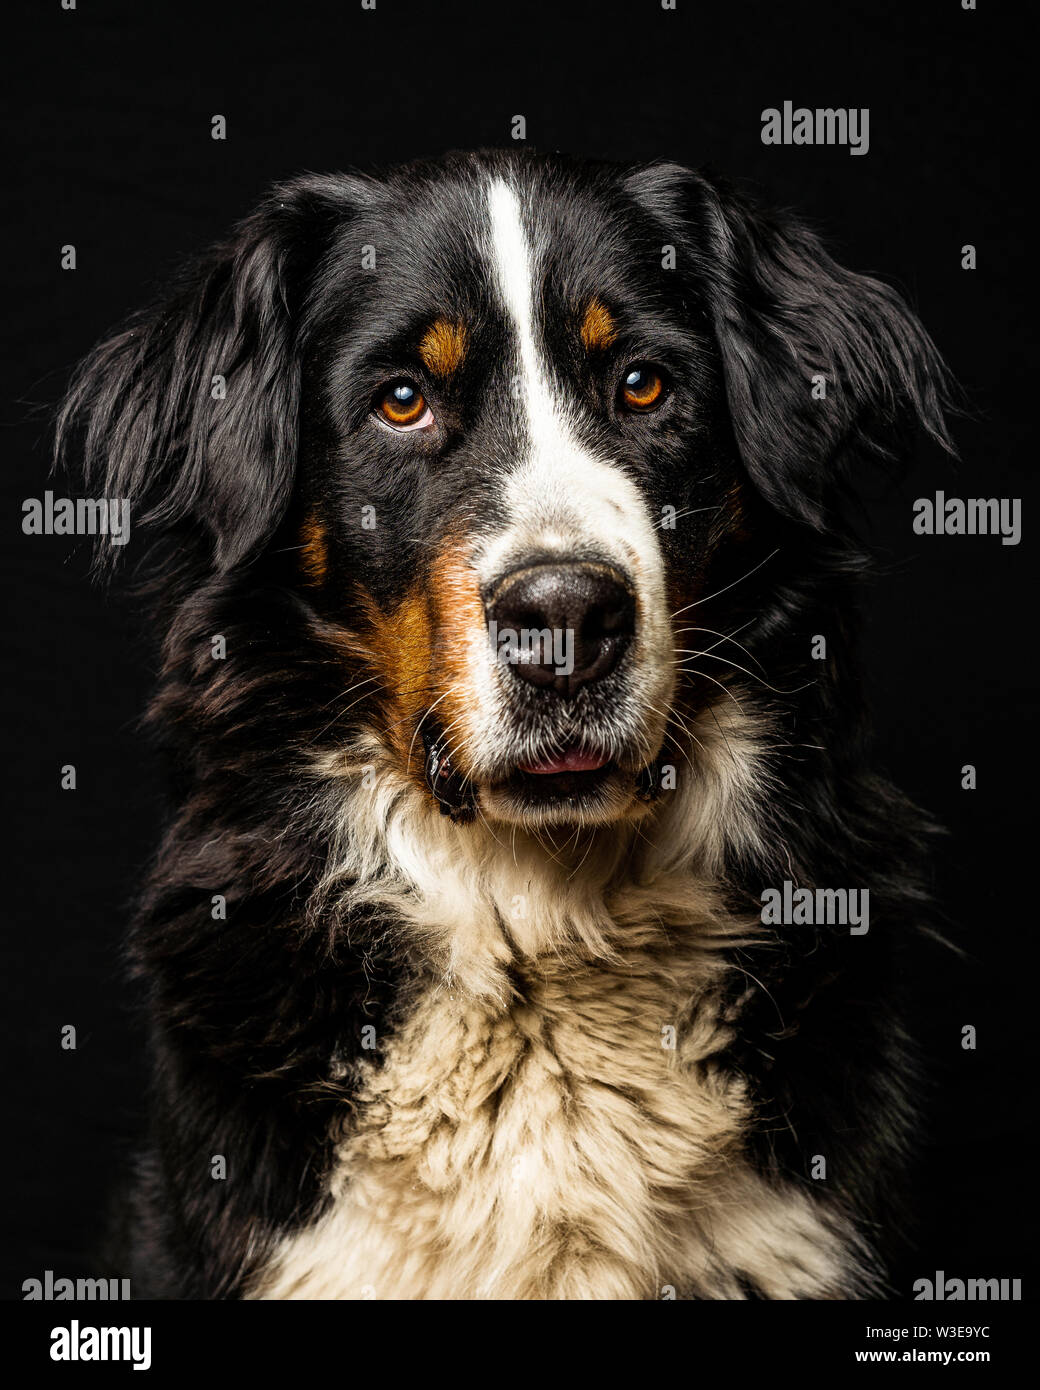 Studio portrait of a bernese mountain dog in front of a black background. The focus is on the dog's eyes. Stock Photo